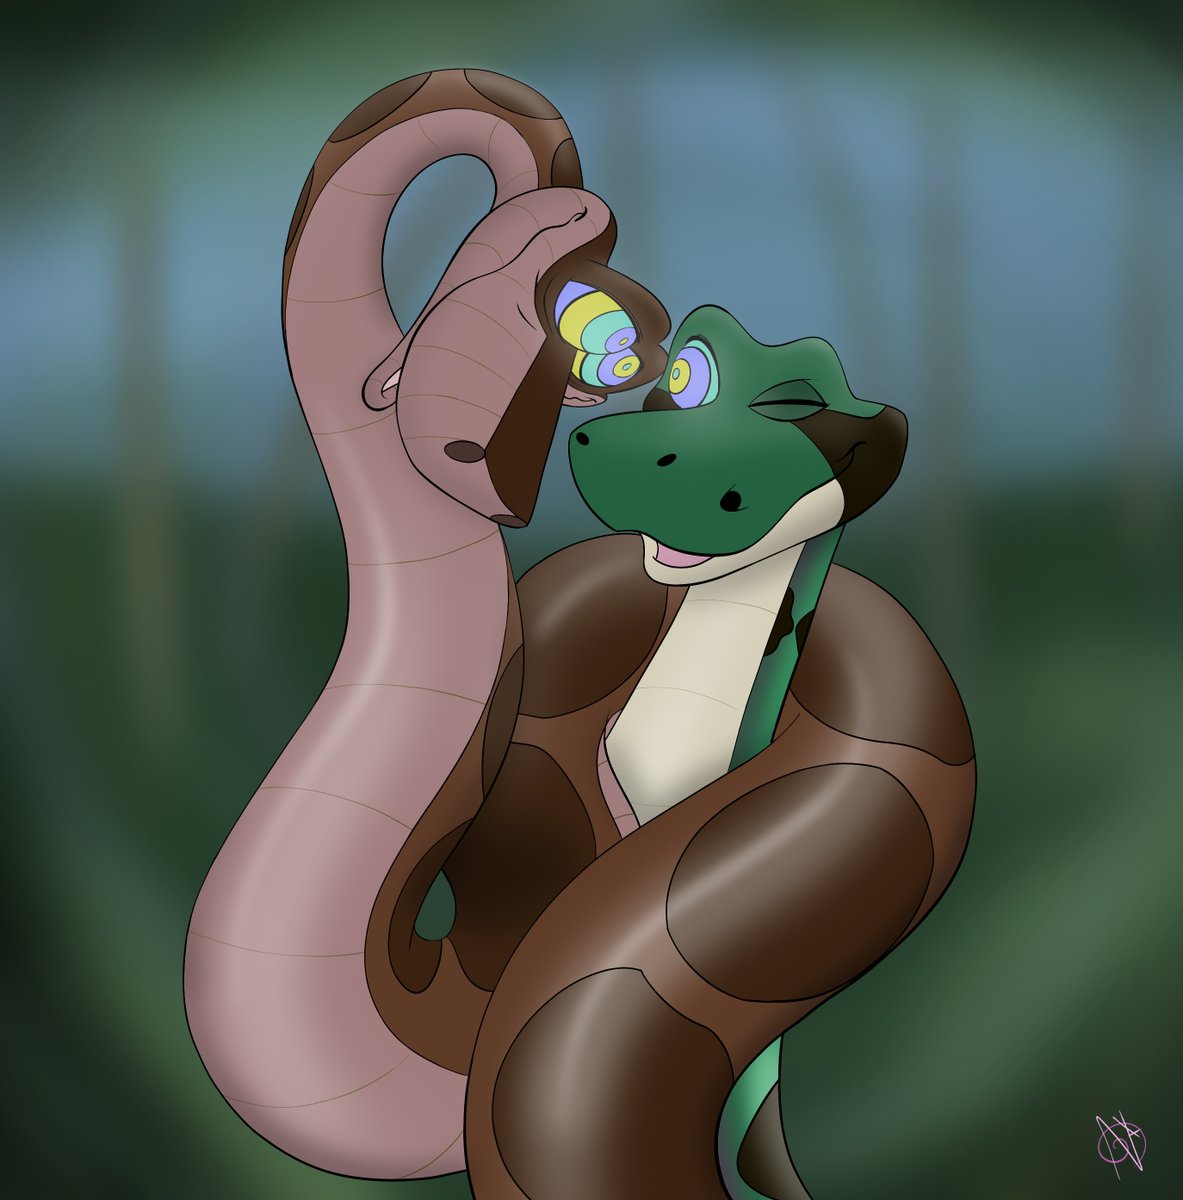 A goofy little piece I did for fun recently of Sierra getting a taste of his own medicine from Kaa. I mean hypnotic snakes should have some fun too, right? hehe Why not indulge now and then?